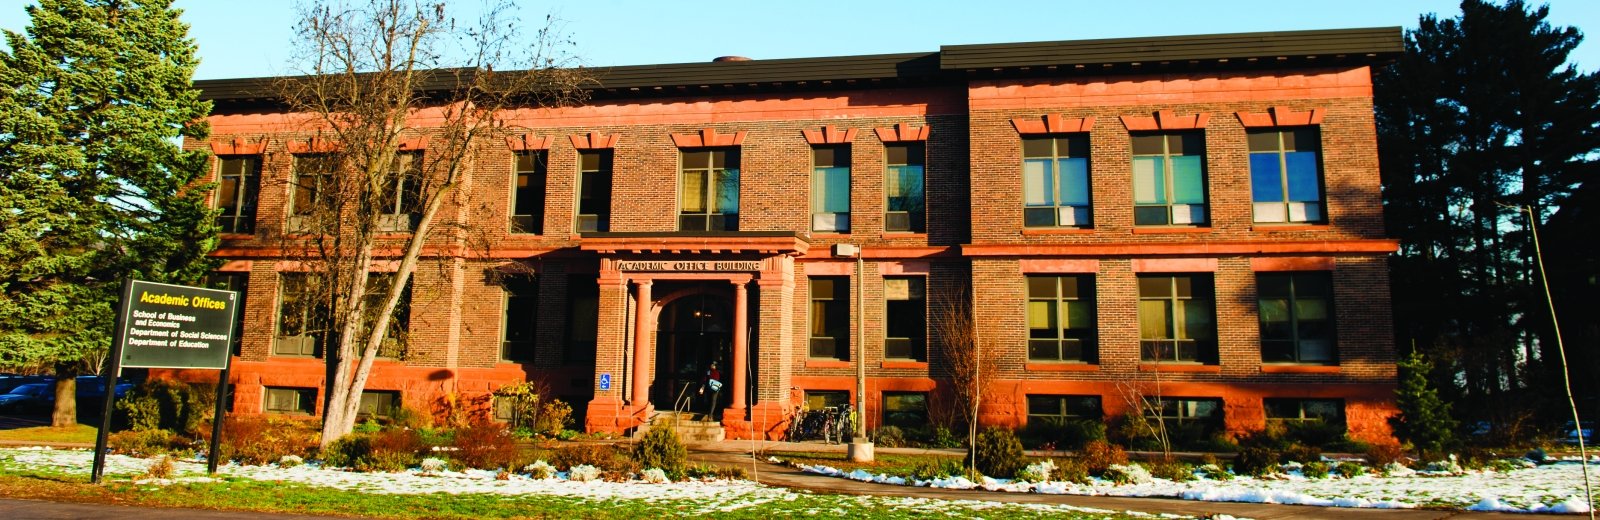 Academic Office Building